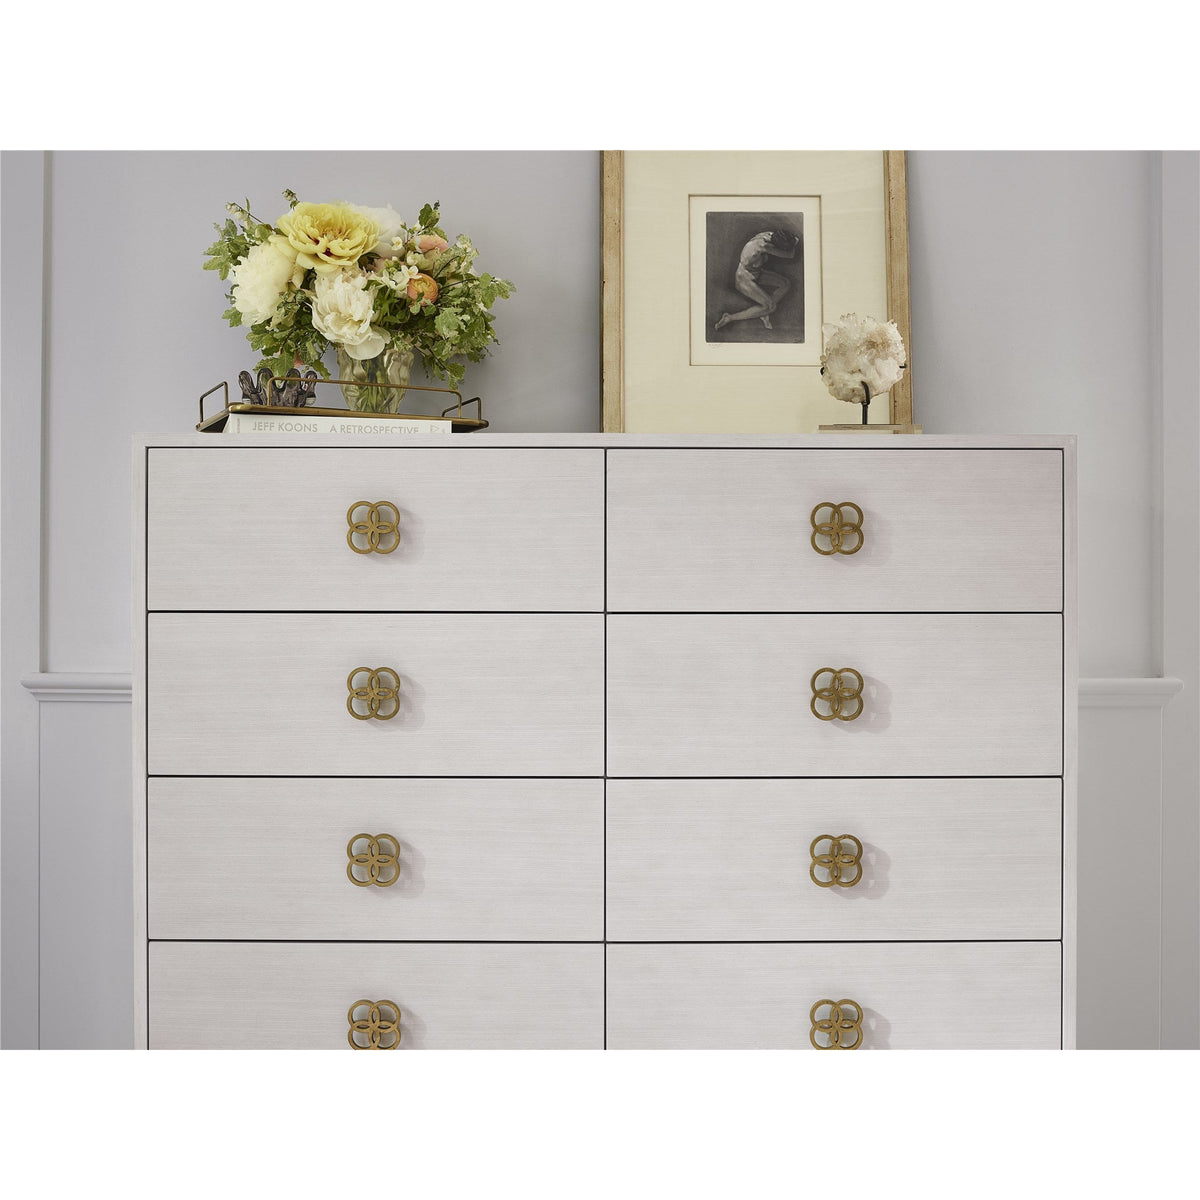 Peony Drawer Chest - Be Bold Furniture